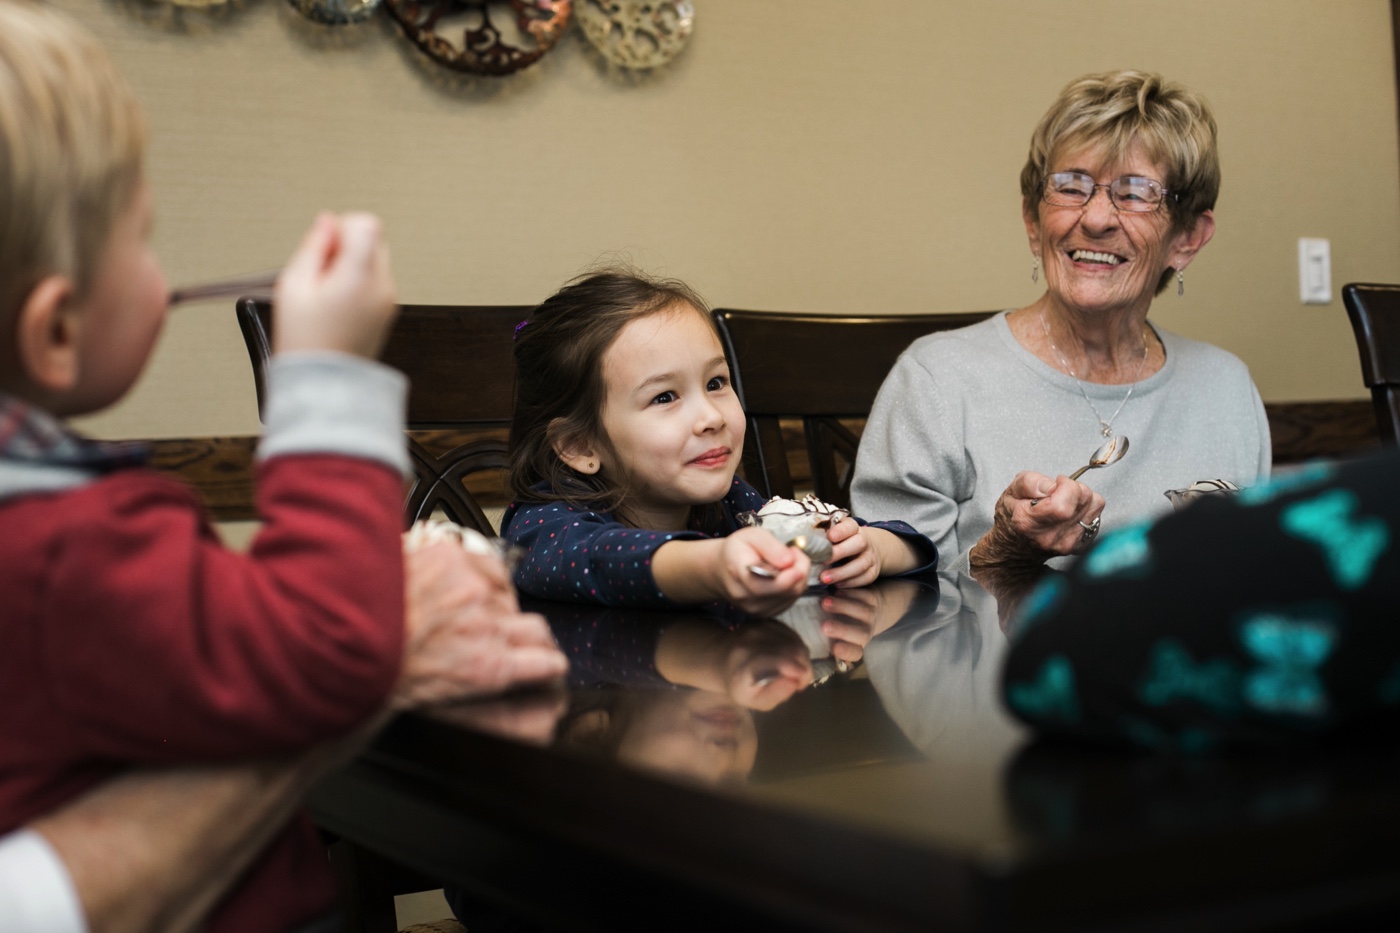 A grandmother seated at the table with her grandchildren as they eat ice cream